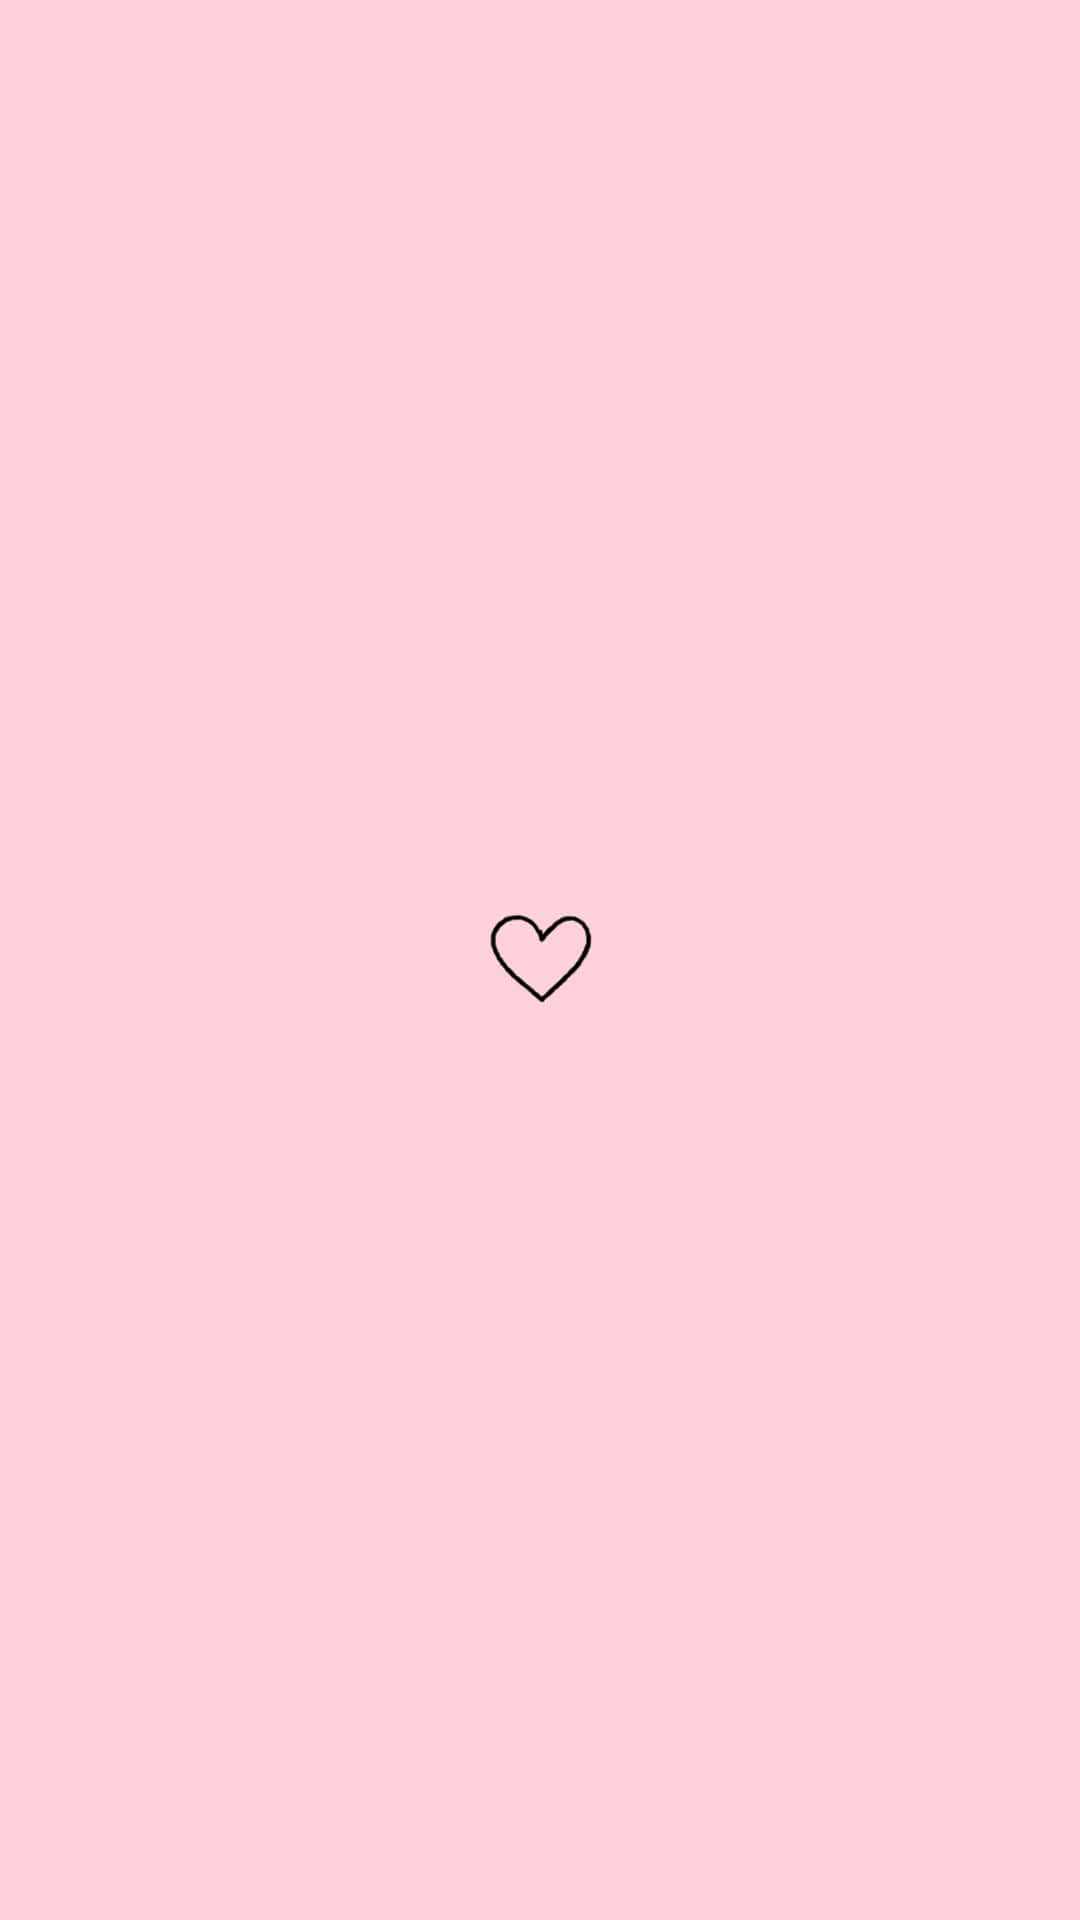 Ig Story Background Small Heart Pink Backdrop